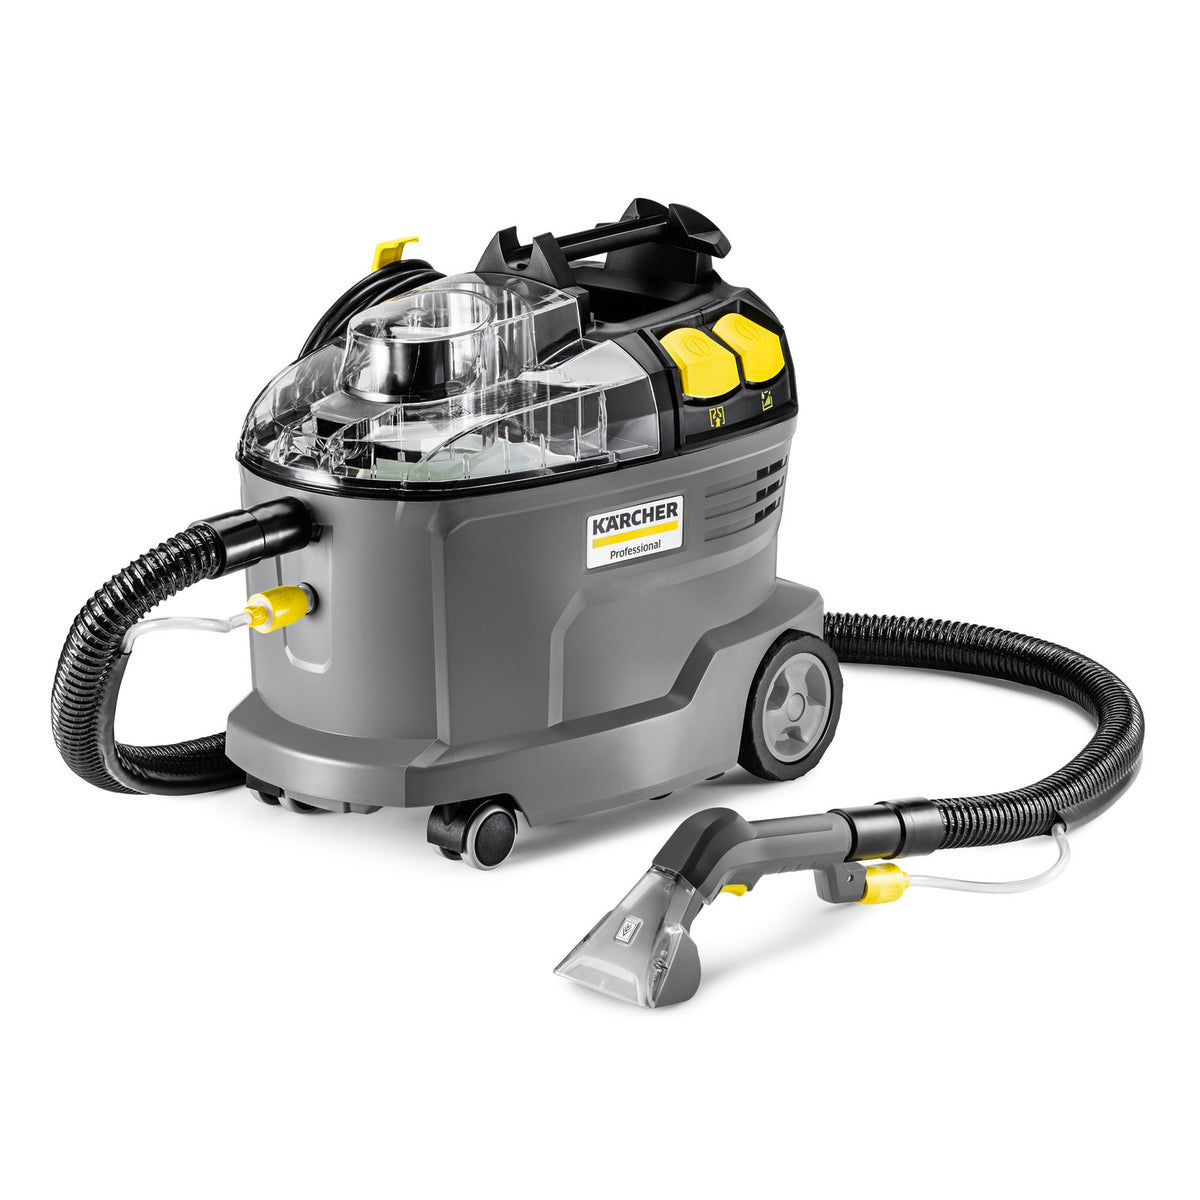 Karcher Puzzi 8/1, Carpet Spotter, 2 Gallon, 35 PSI, Cold Water, 8' Hoses Upholstery Tool